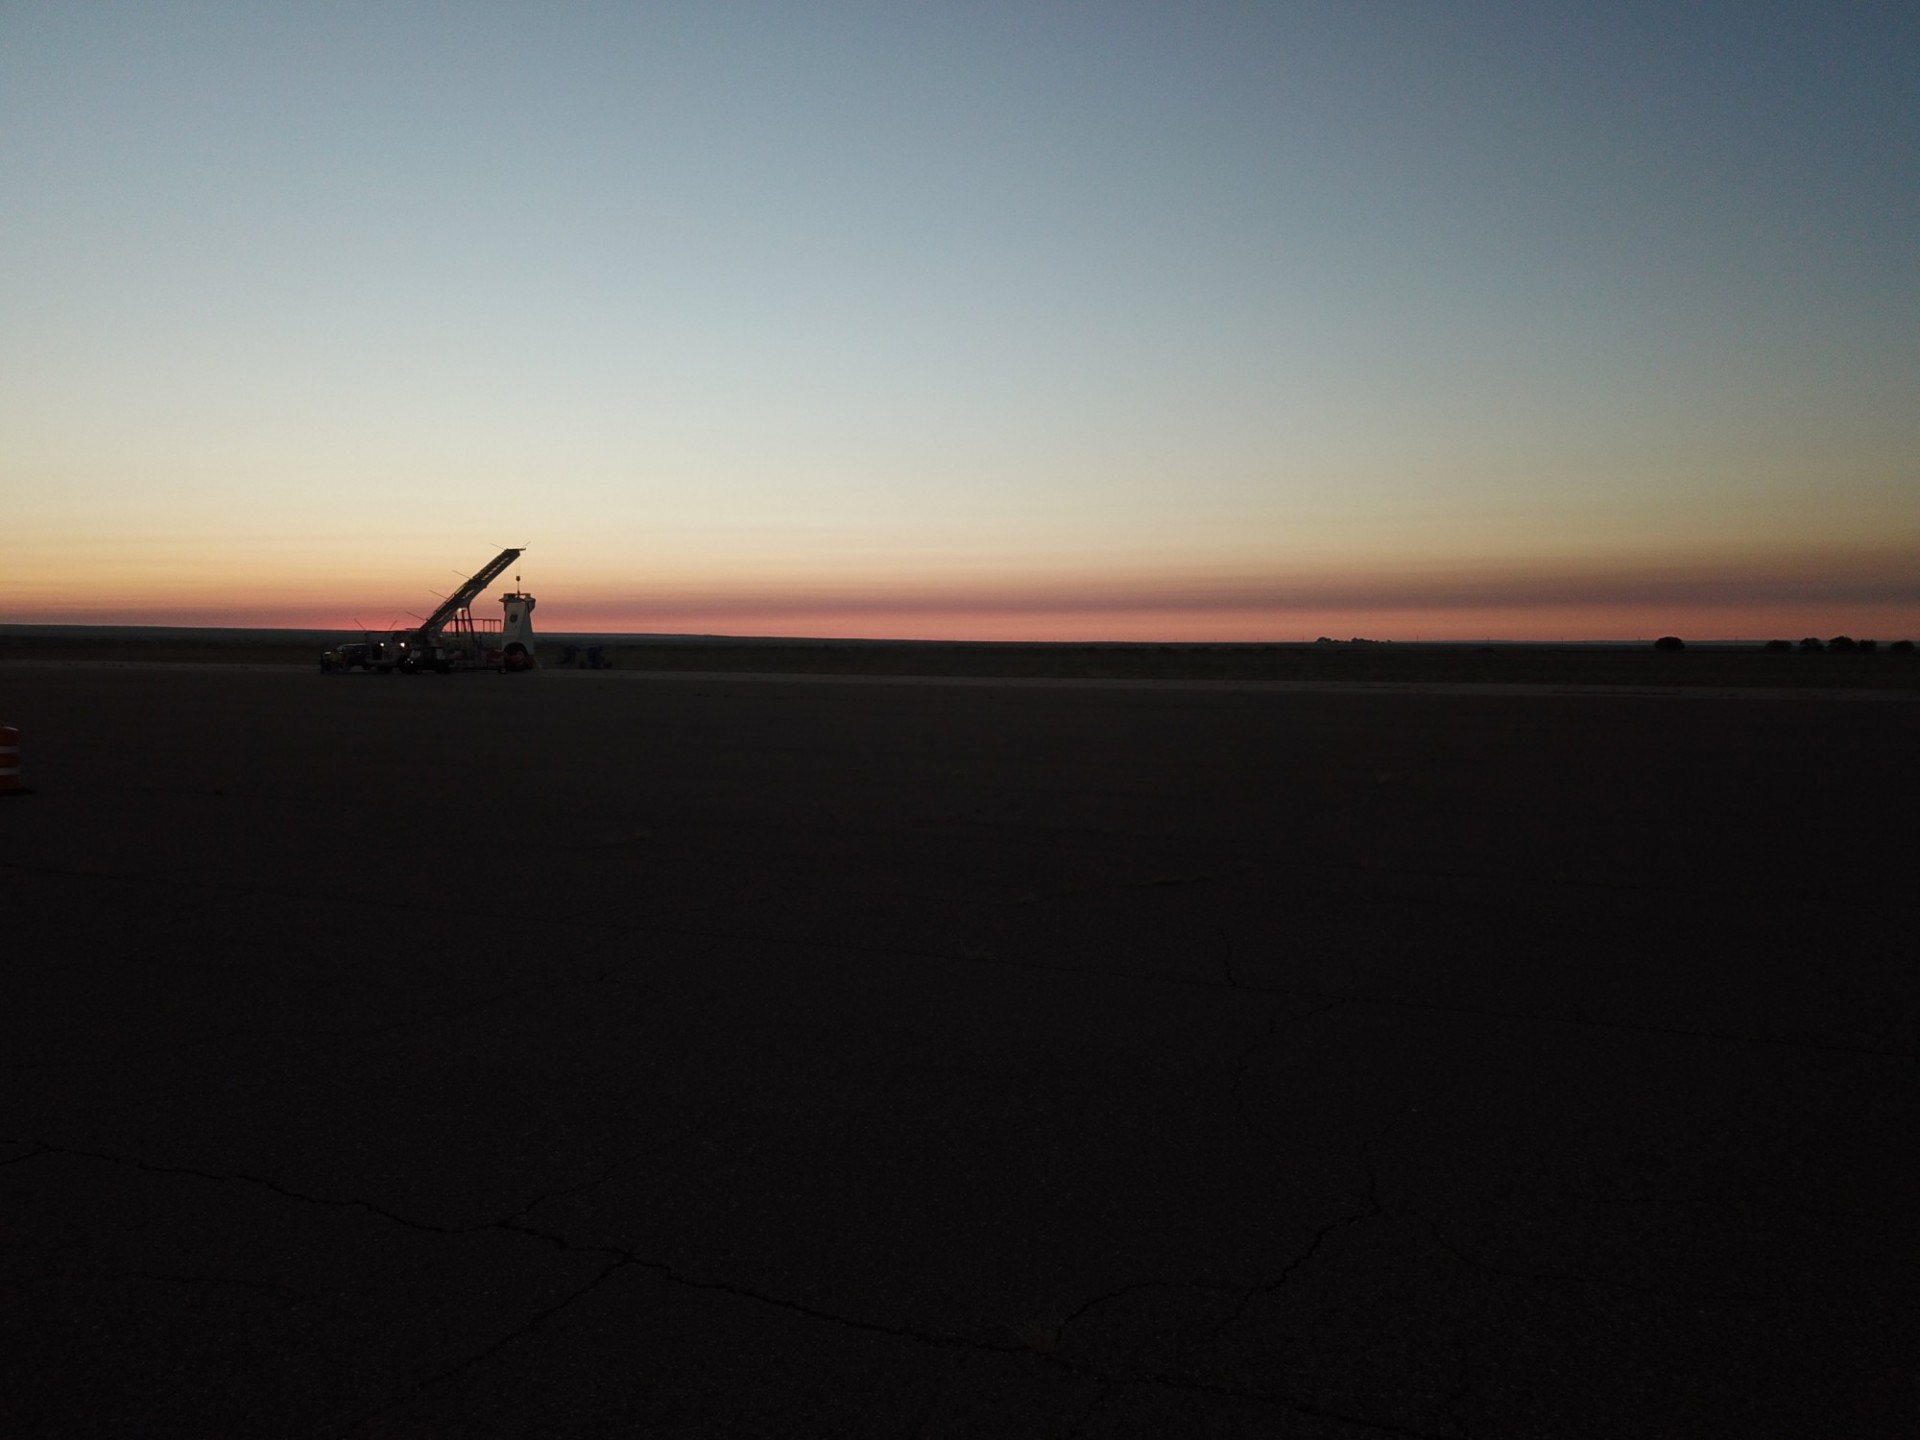 FIREBall at sunset on launch site.